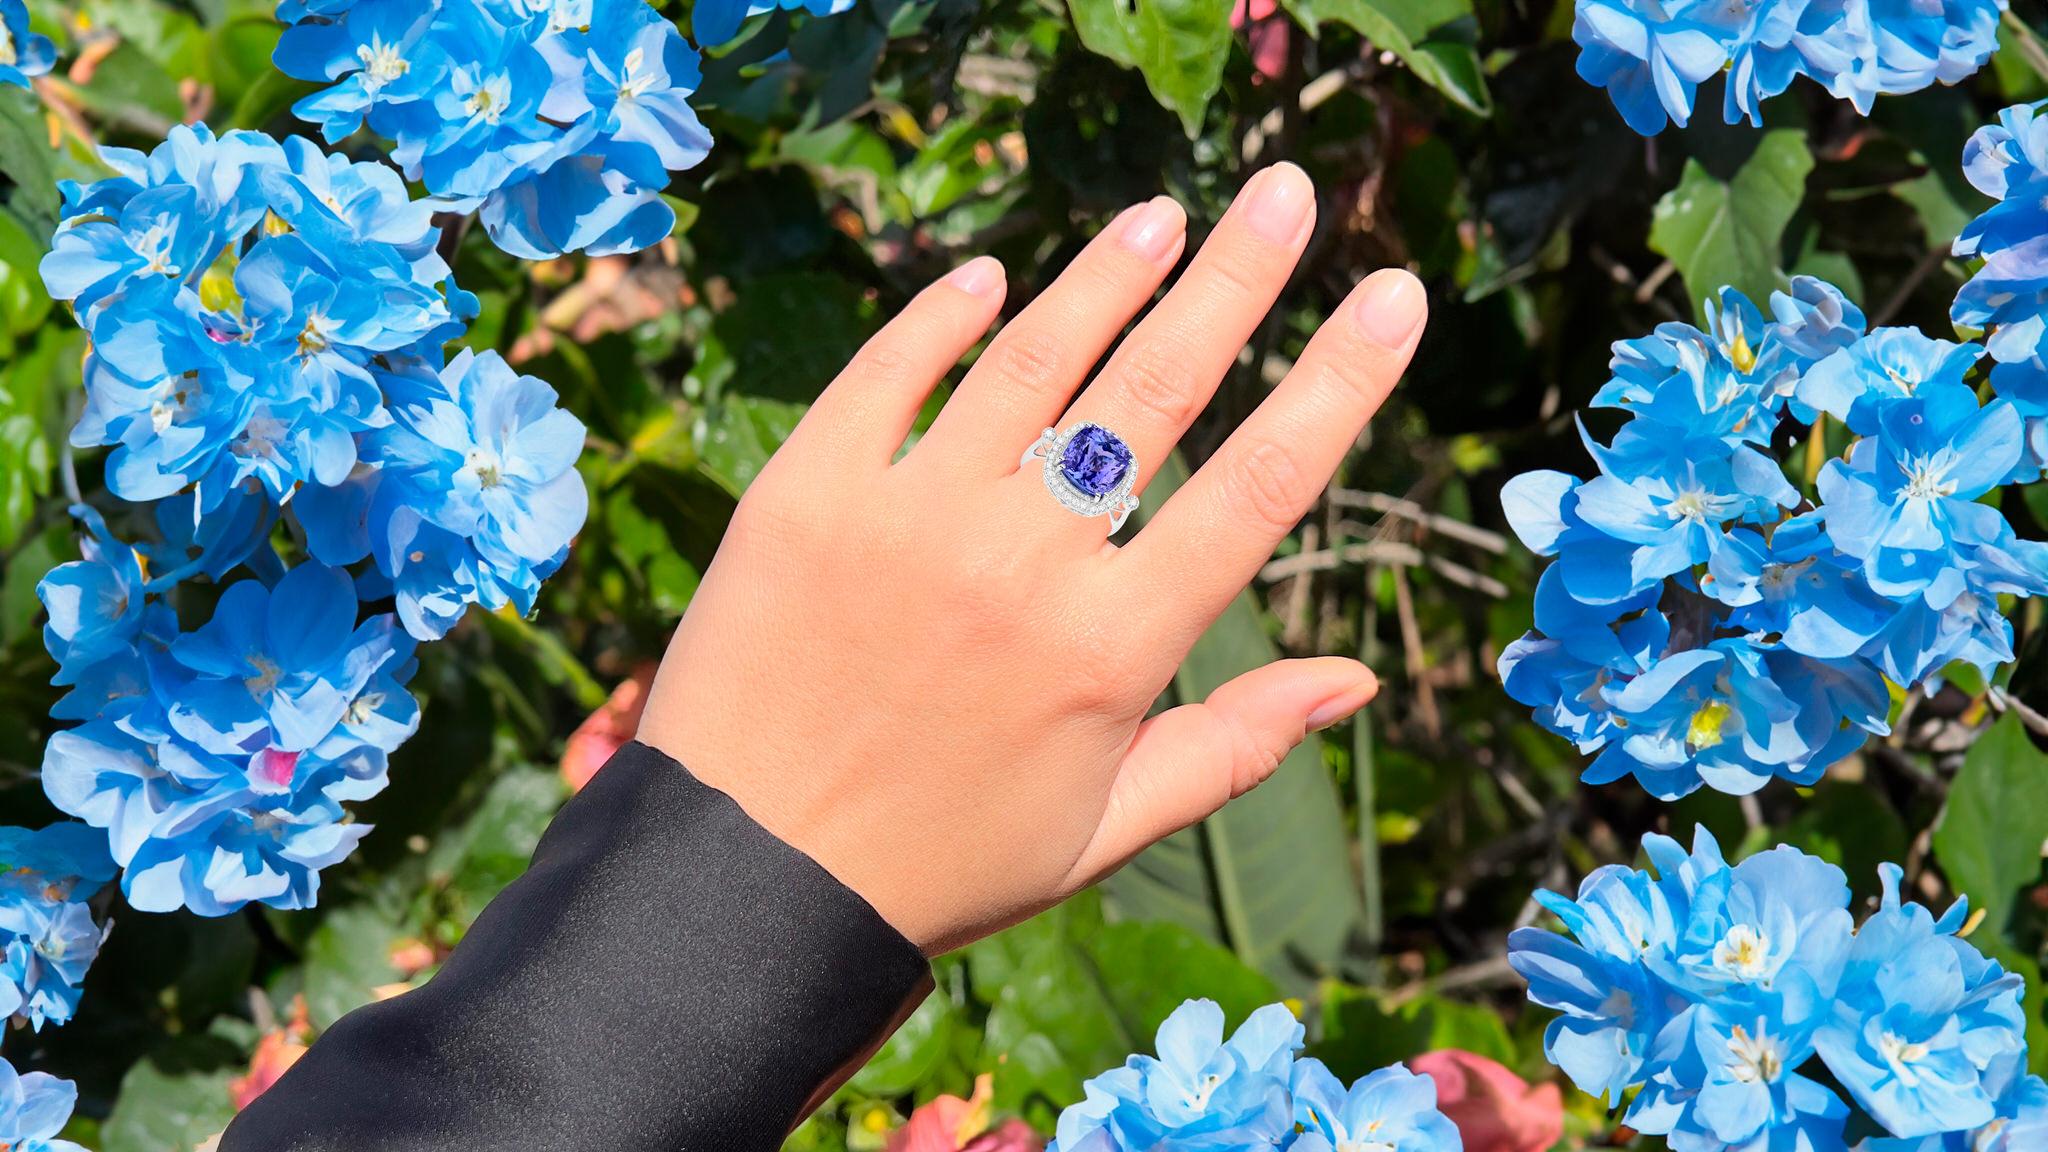 It comes with the Gemological Appraisal by GIA GG/AJP
All Gemstones are Natural
Tanzanite =  6.35 Carat
Cut: Cushion
Diamonds = 0.25 Carats
( Color: H, Clarity: SI )
Metal: 14K White Gold
Ring Size: 7* US
*It can be resized complimentary